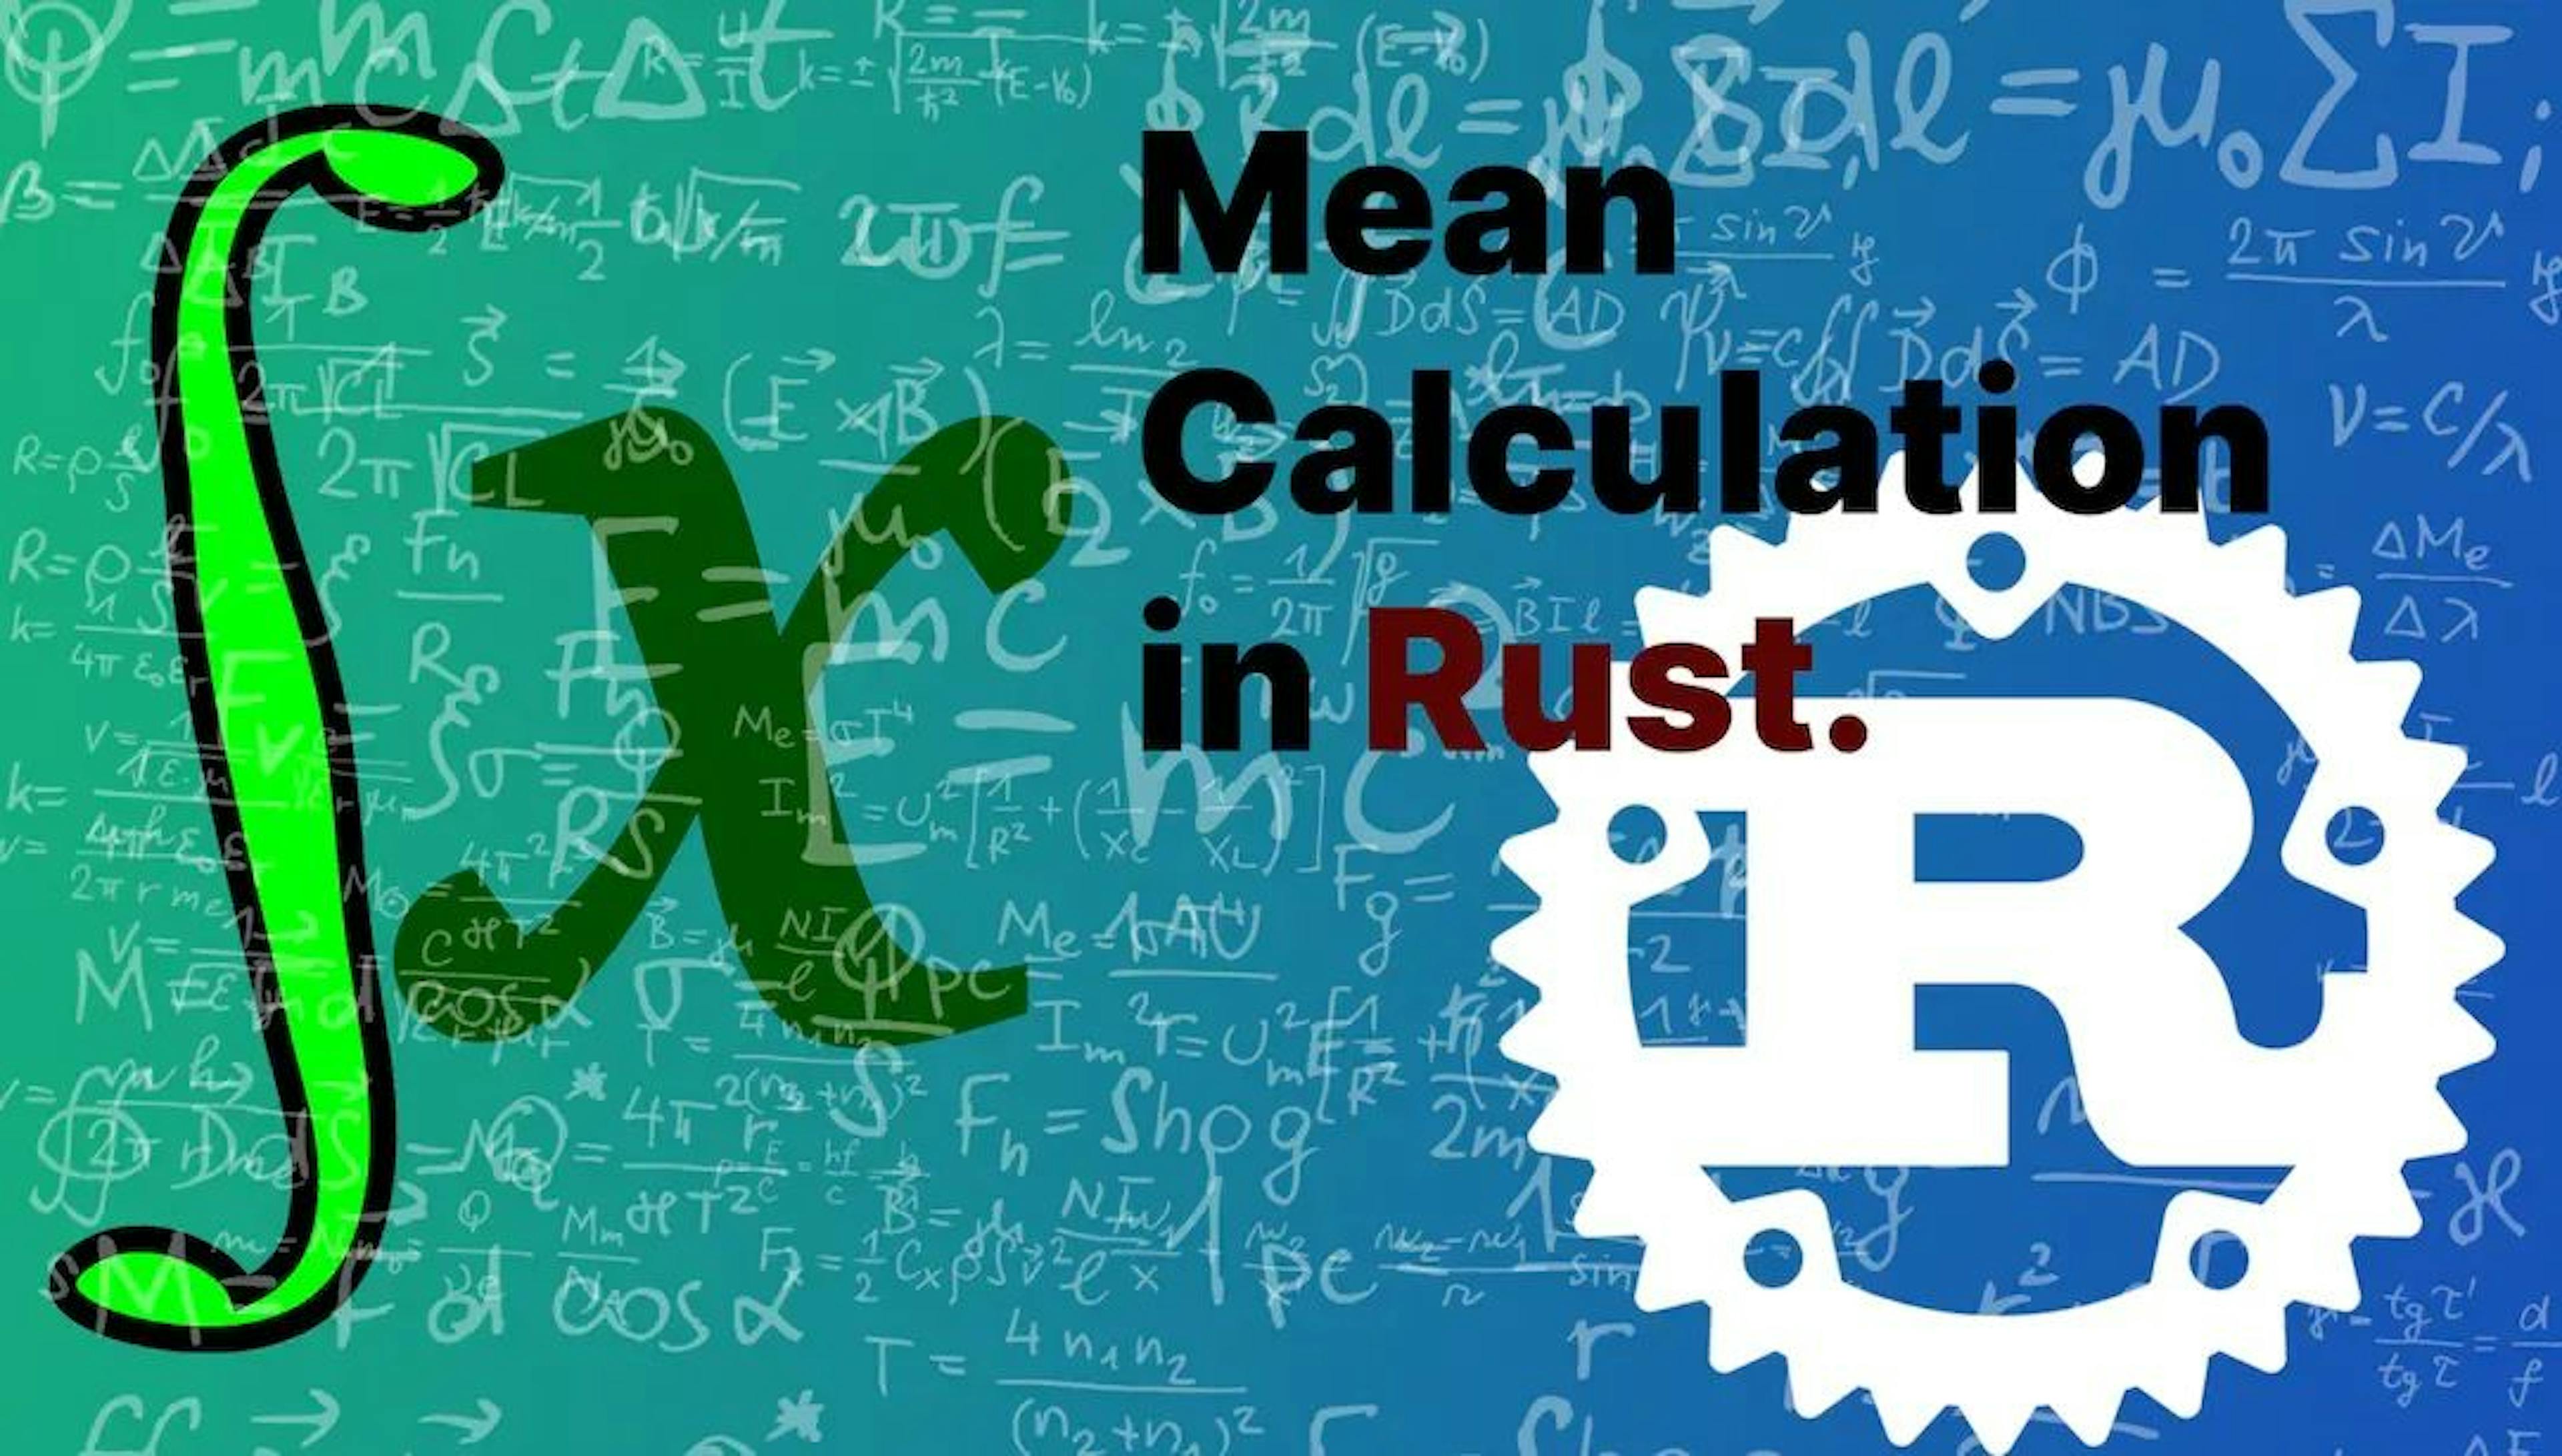 featured image - Calculating the Mean of an Array in Rust 